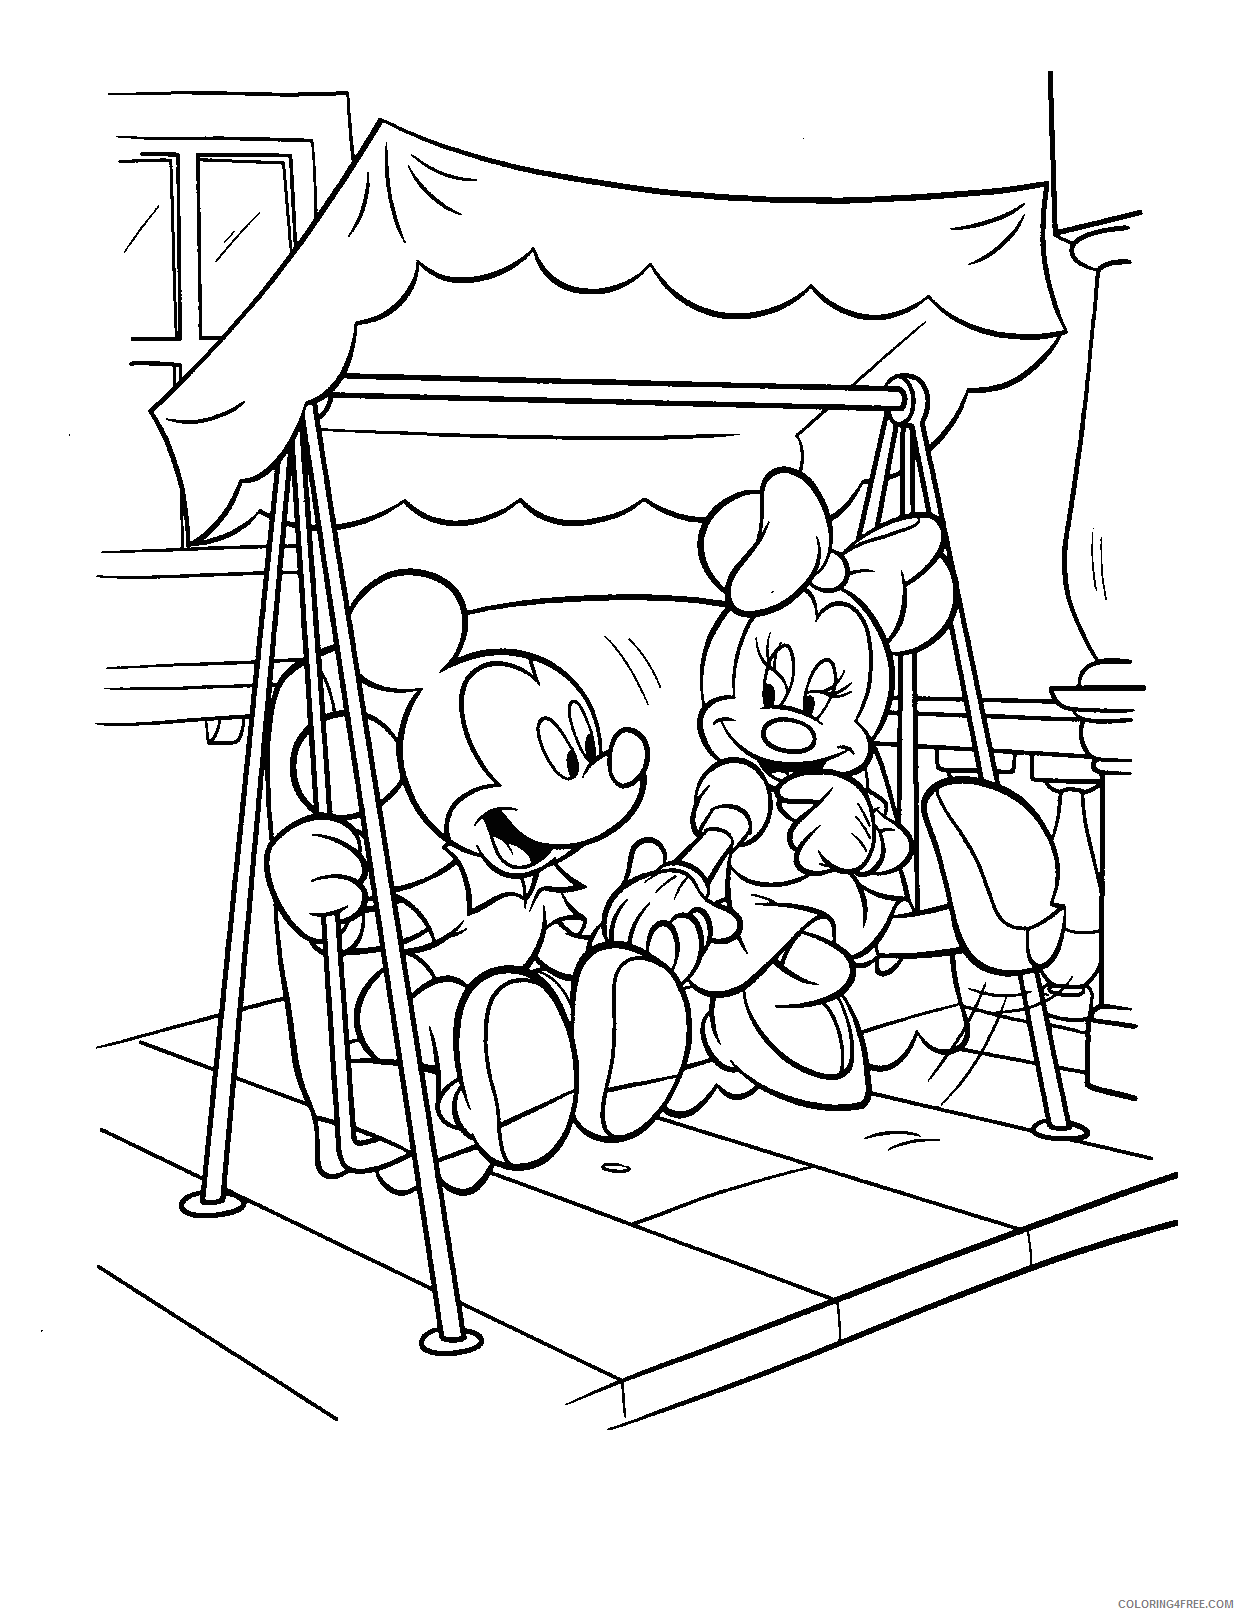 mickey-mouse-coloring-pages-cartoons-of-mickey-and-minnie-mouse